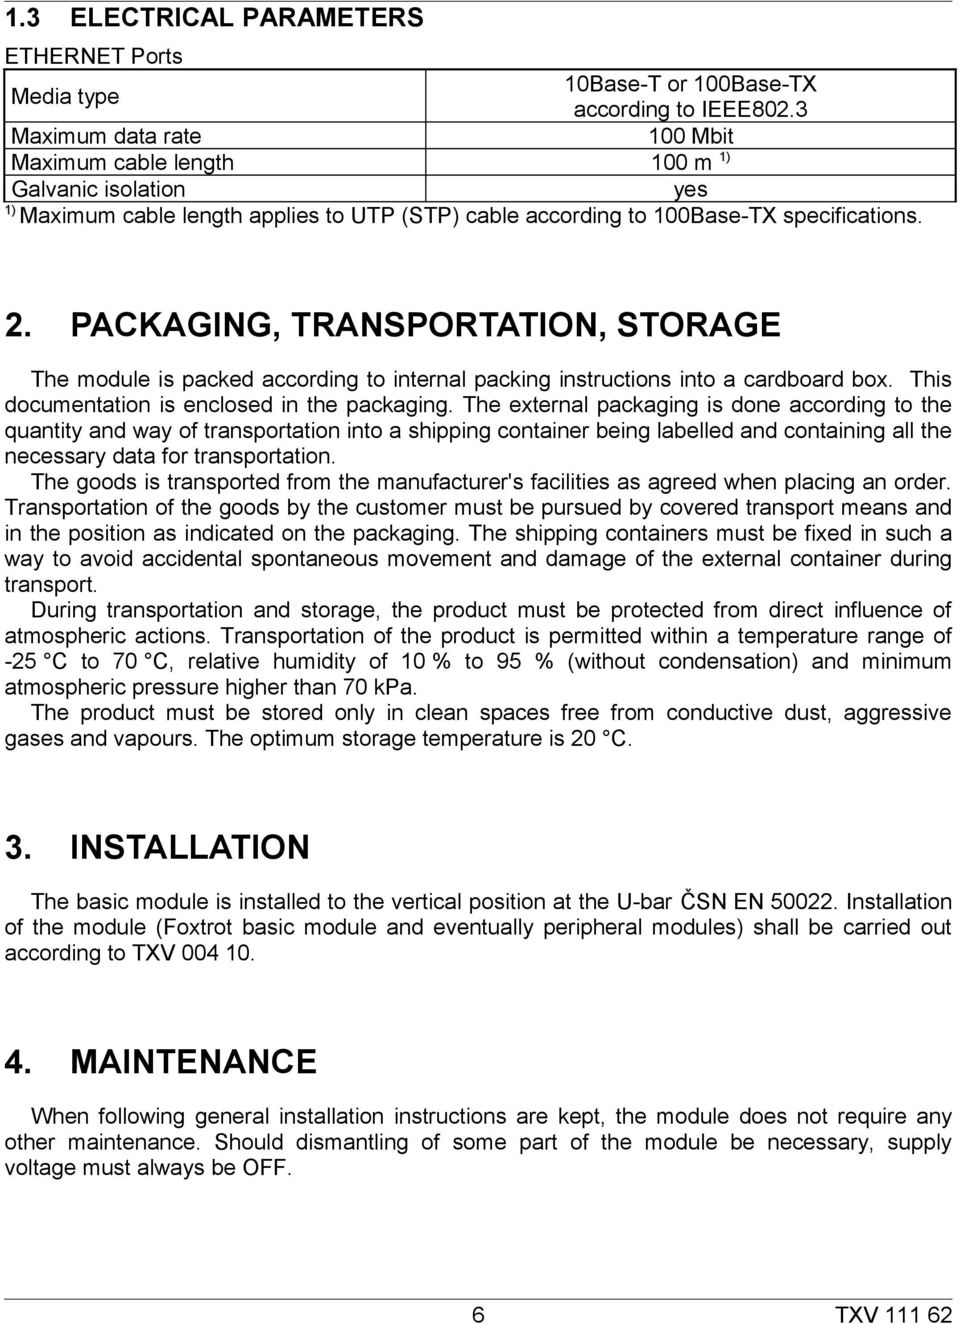 PACKAGING, TRANSPORTATION, STORAGE The module is packed according to internal packing instructions into a cardboard box. This documentation is enclosed in the packaging.